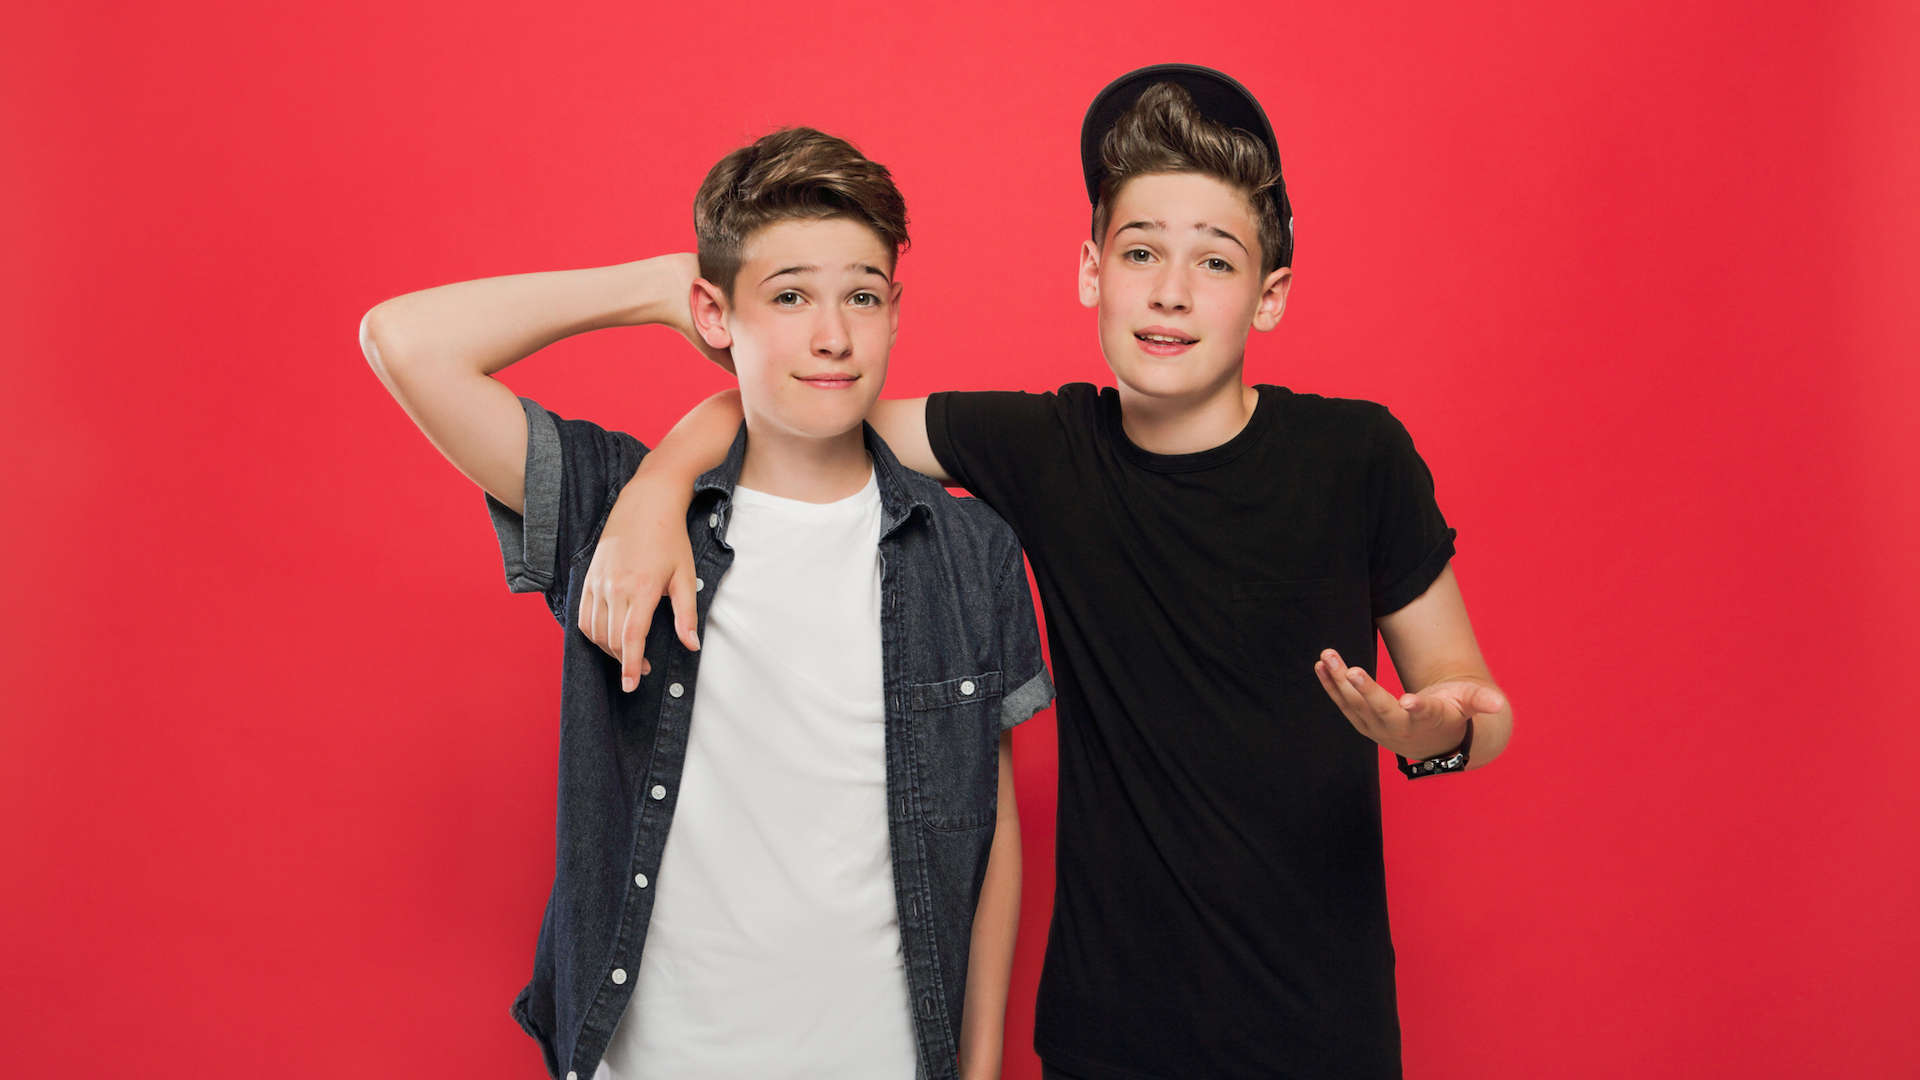 Max and Harvey pose against a red background